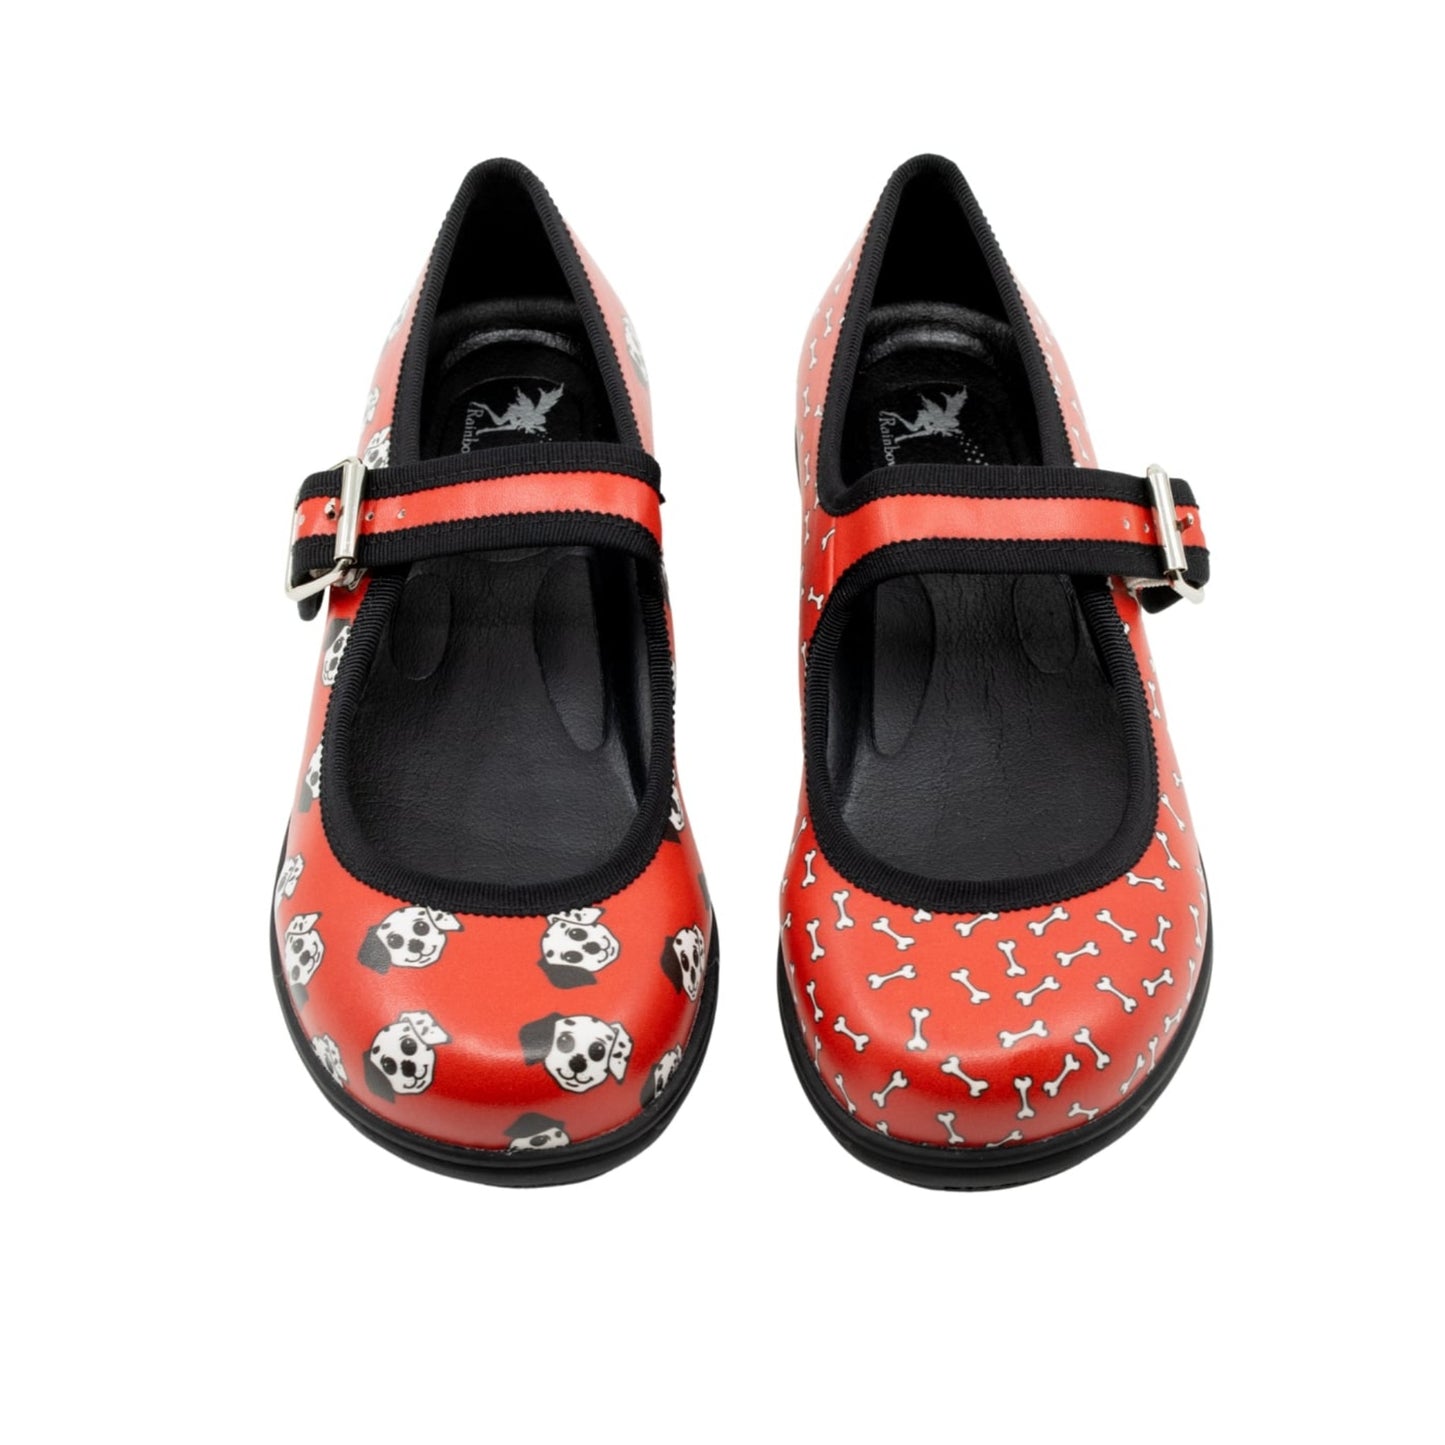 Puppy Love Mary Janes by RainbowsAndFairies.com.au (Dalmations - Dog Bones - Red & Black - Buckle Up Shoes - Mismatched Shoes - Fire Truck - Dogs) - SKU: FW_MARYJ_PUPPY_ORG - Pic-02